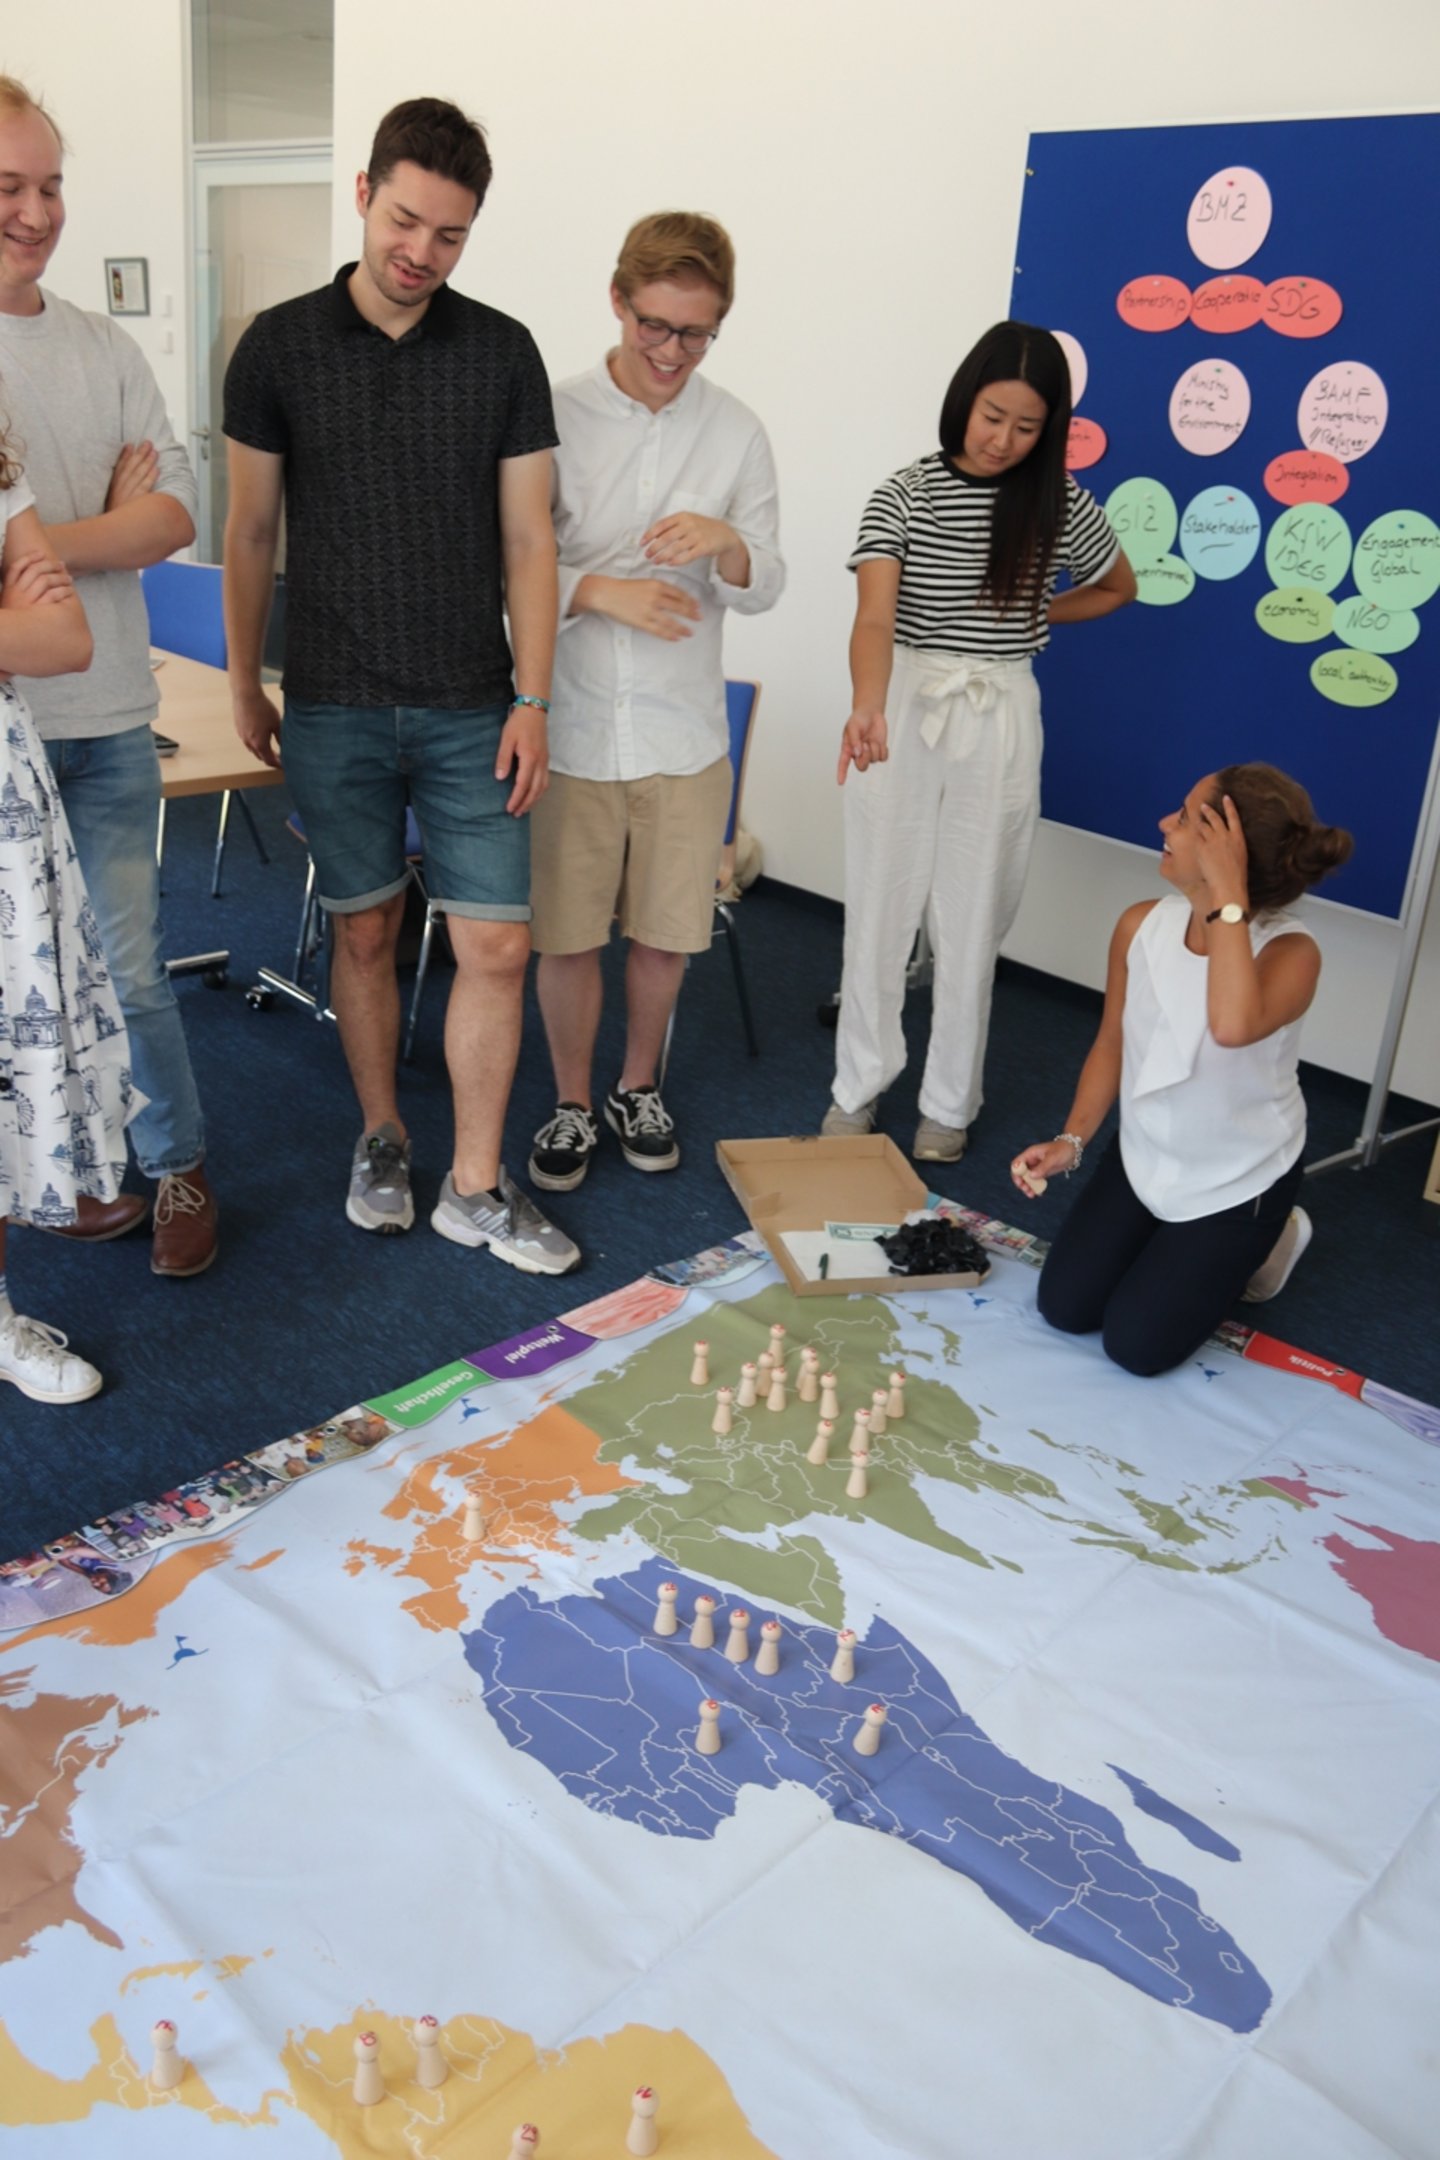 Students playing a game on a big worldmap on the floor.